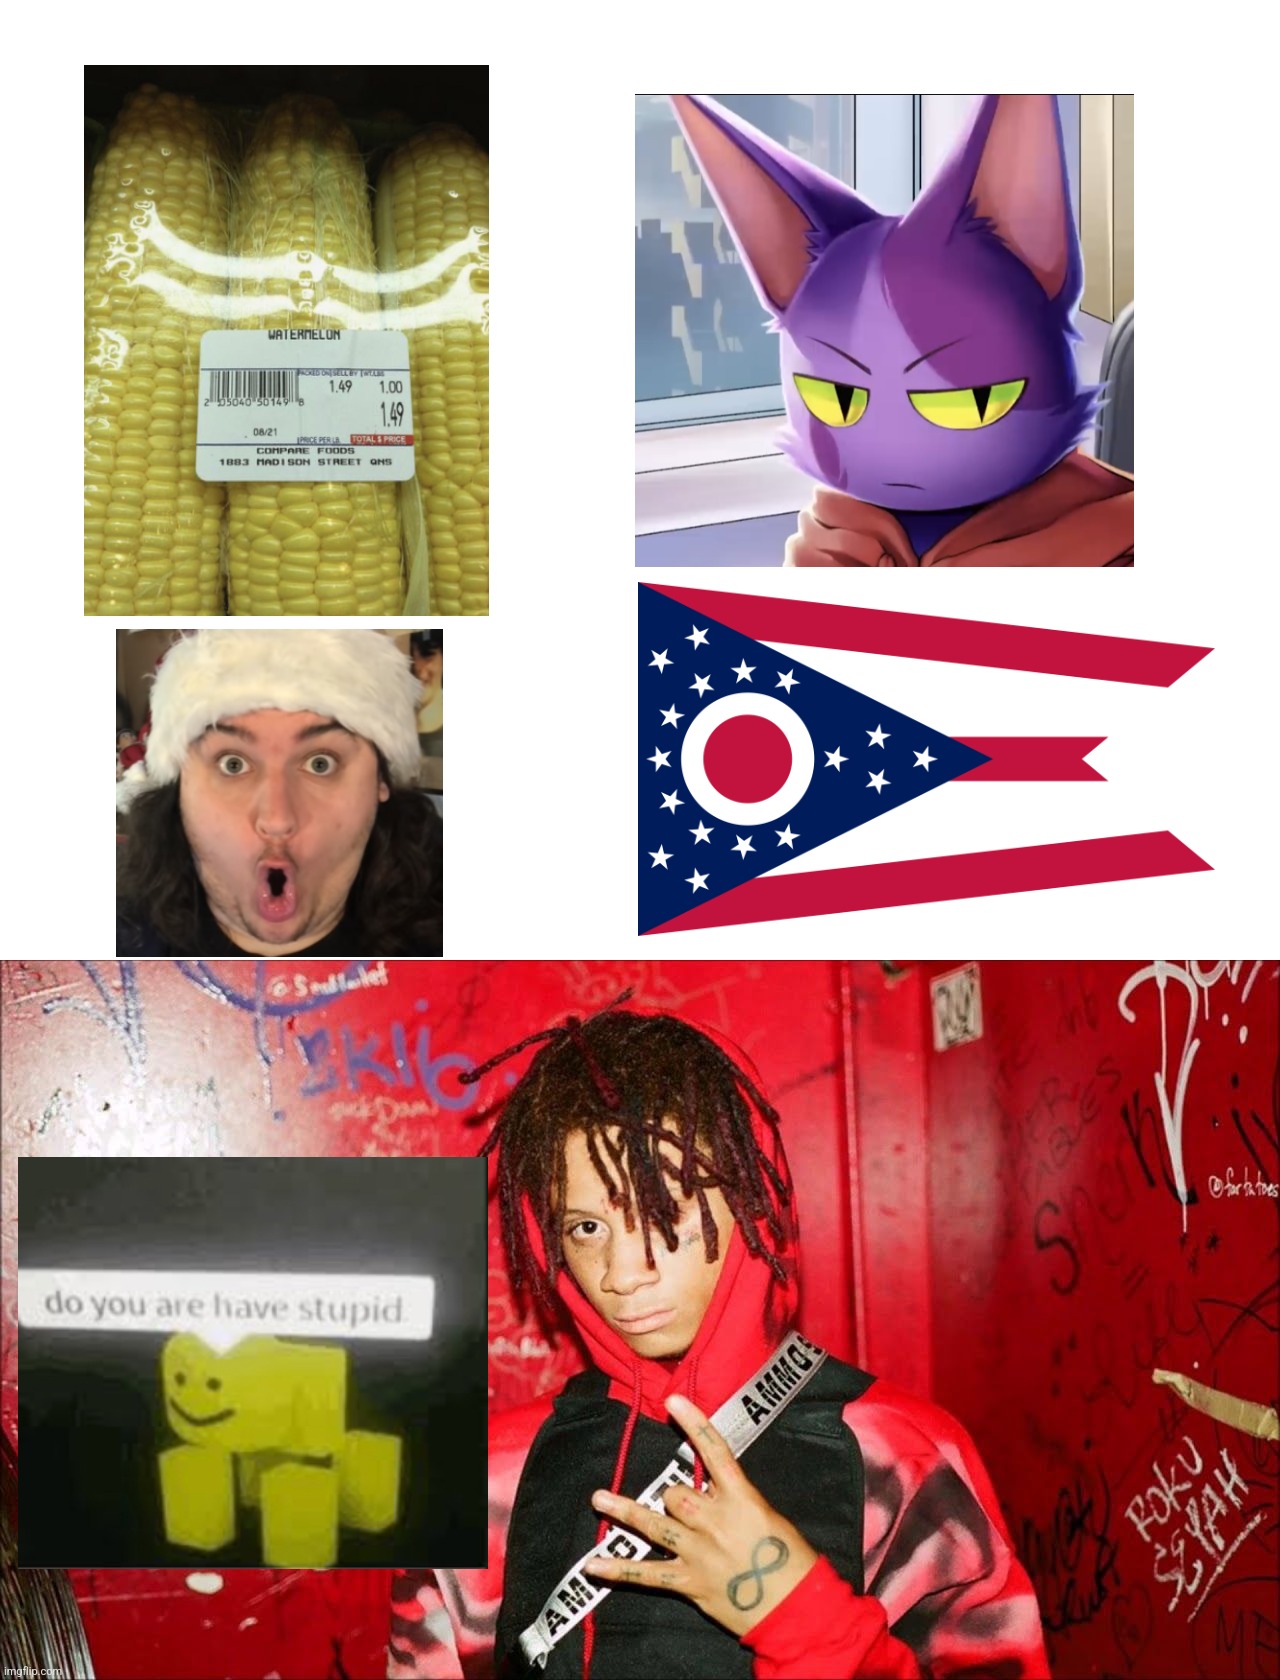 Epic collage | image tagged in random images collage | made w/ Imgflip meme maker